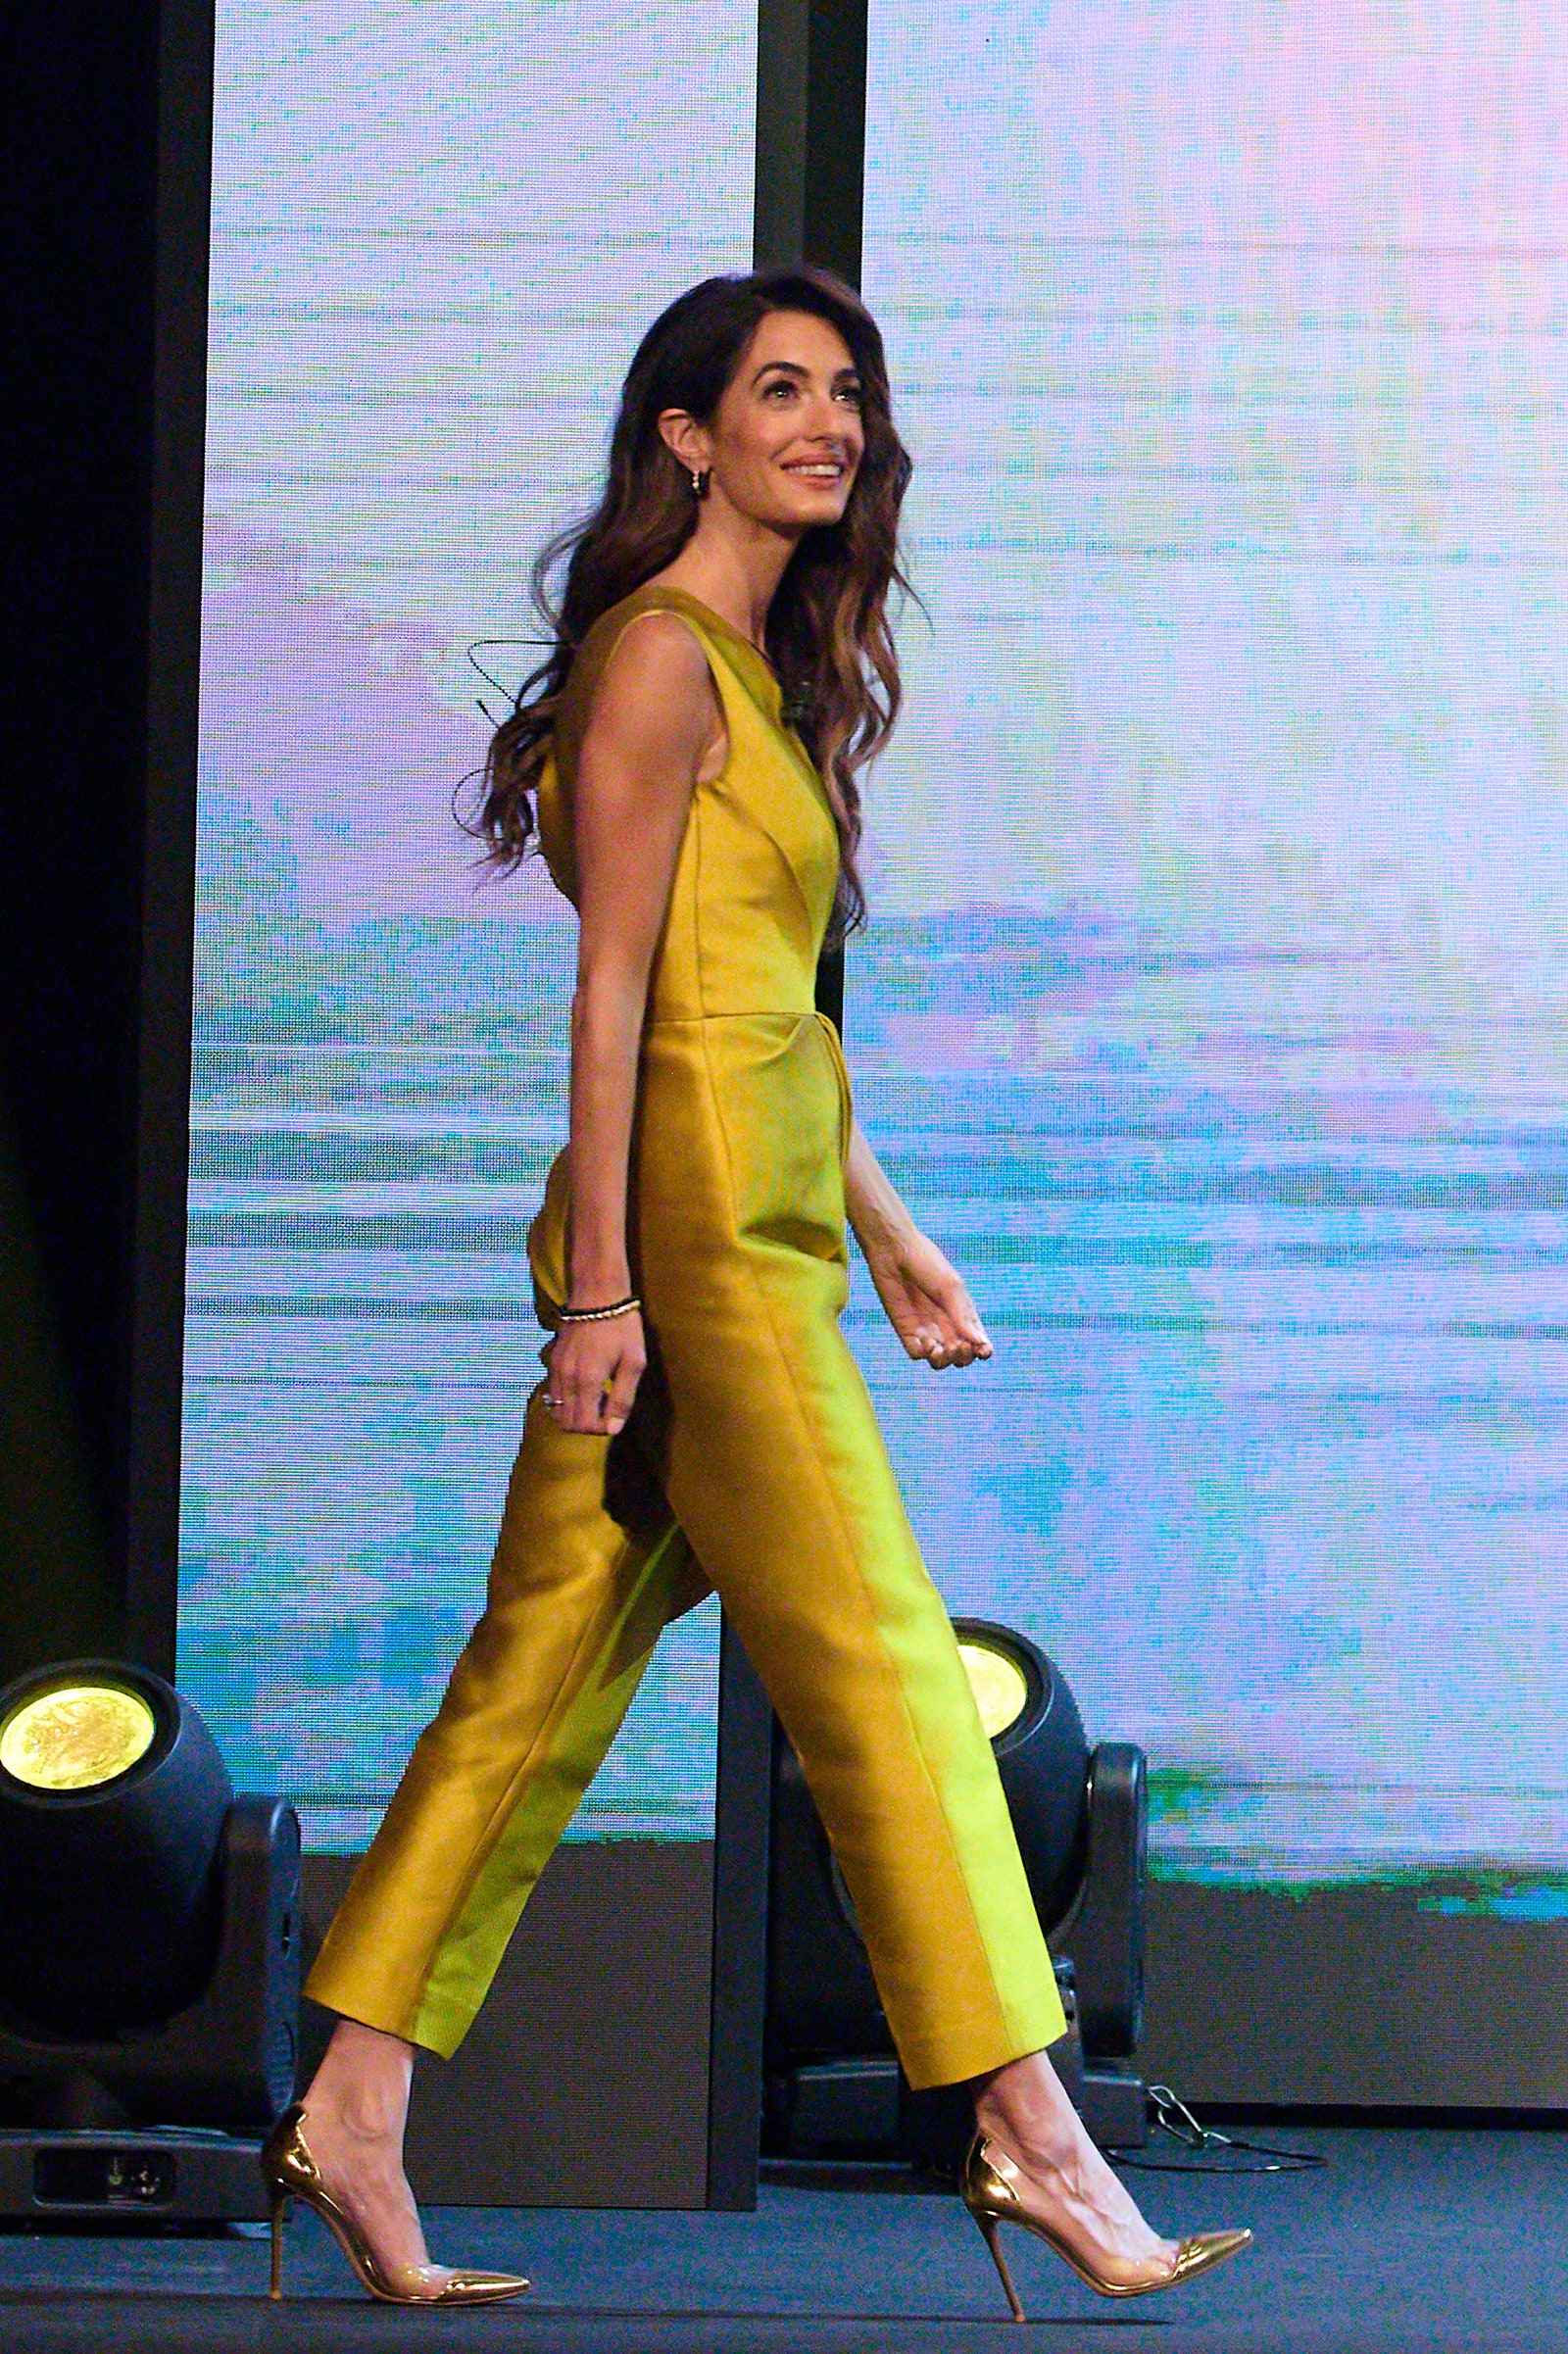 Amal Clooney Trades in a Disco Ball Dress and Curls for a Golden Summer Jumpsuit in Europe